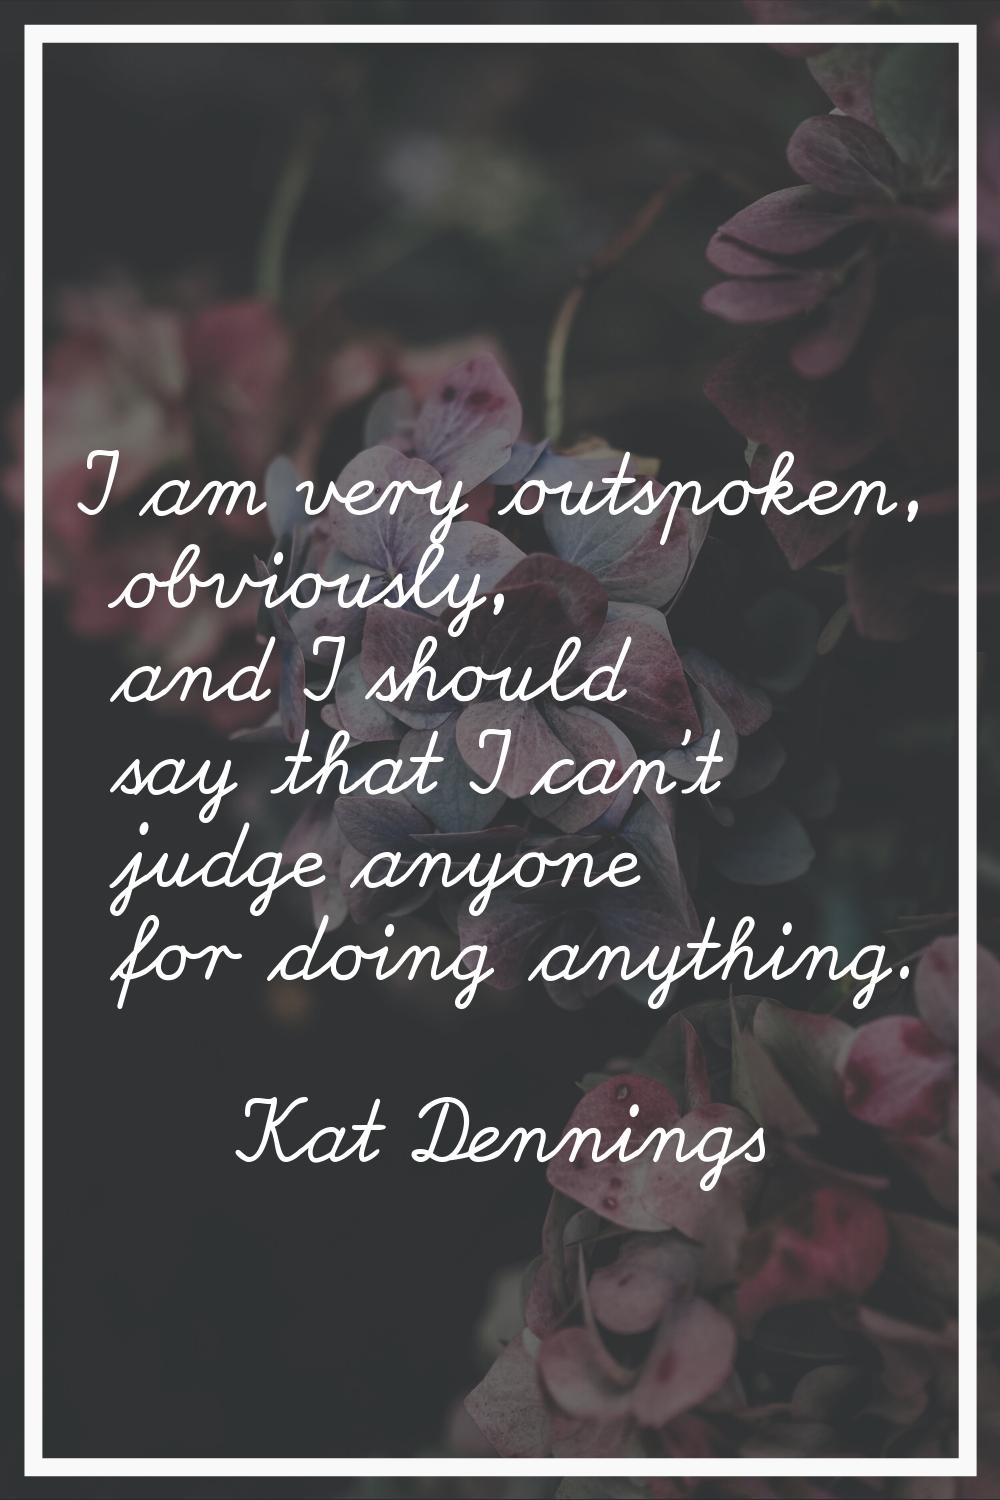 I am very outspoken, obviously, and I should say that I can't judge anyone for doing anything.